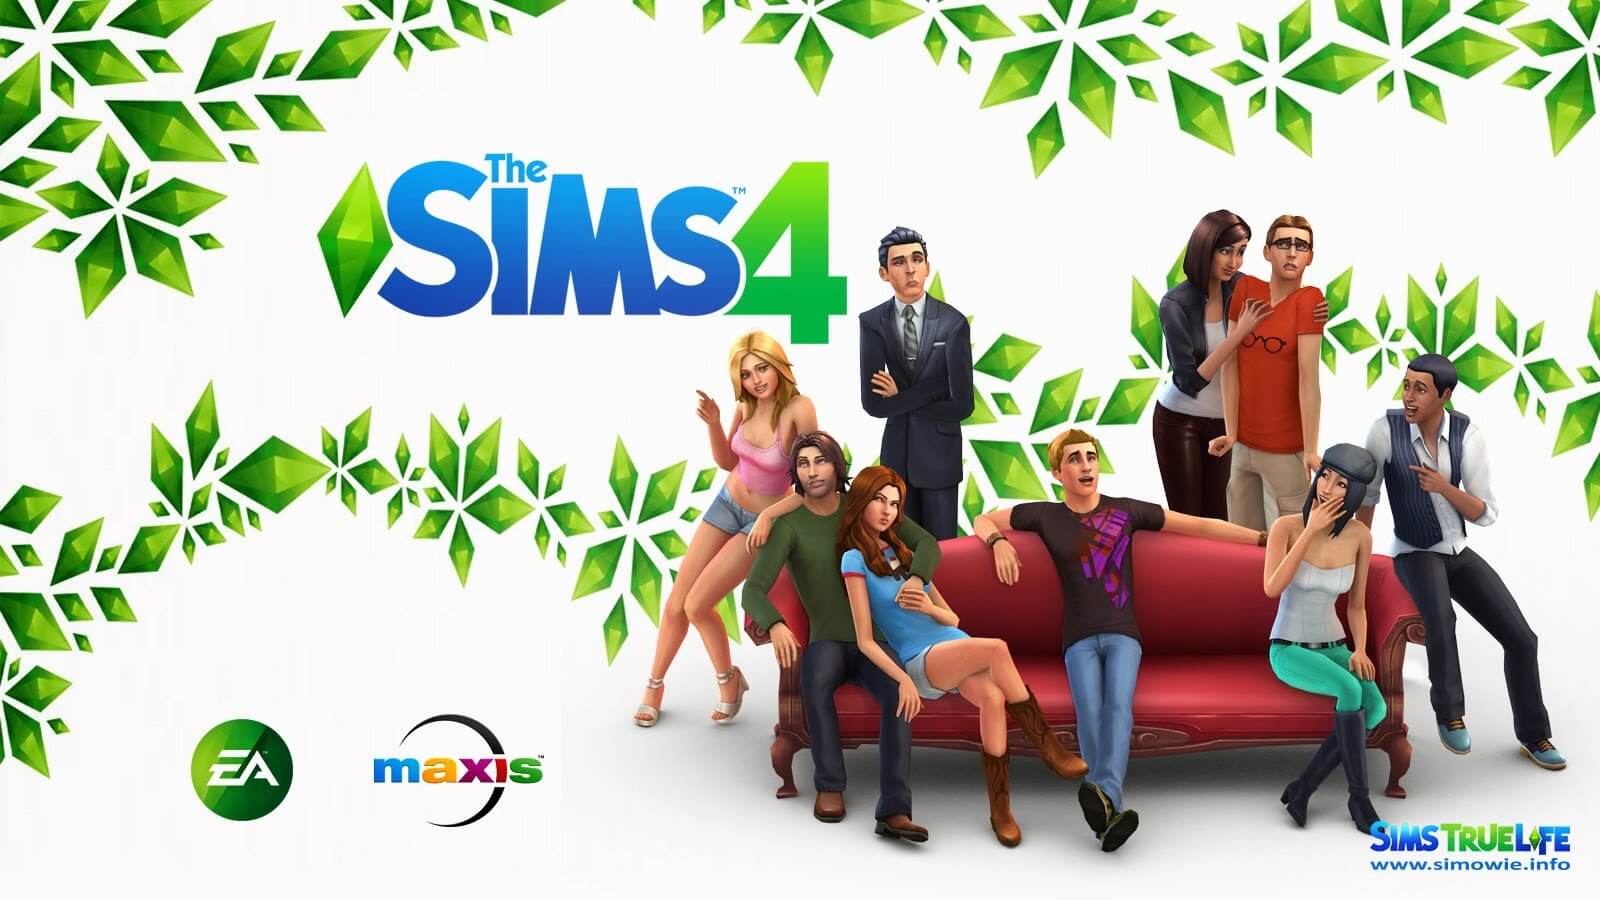 Sims 4 Deluxe Pc Download